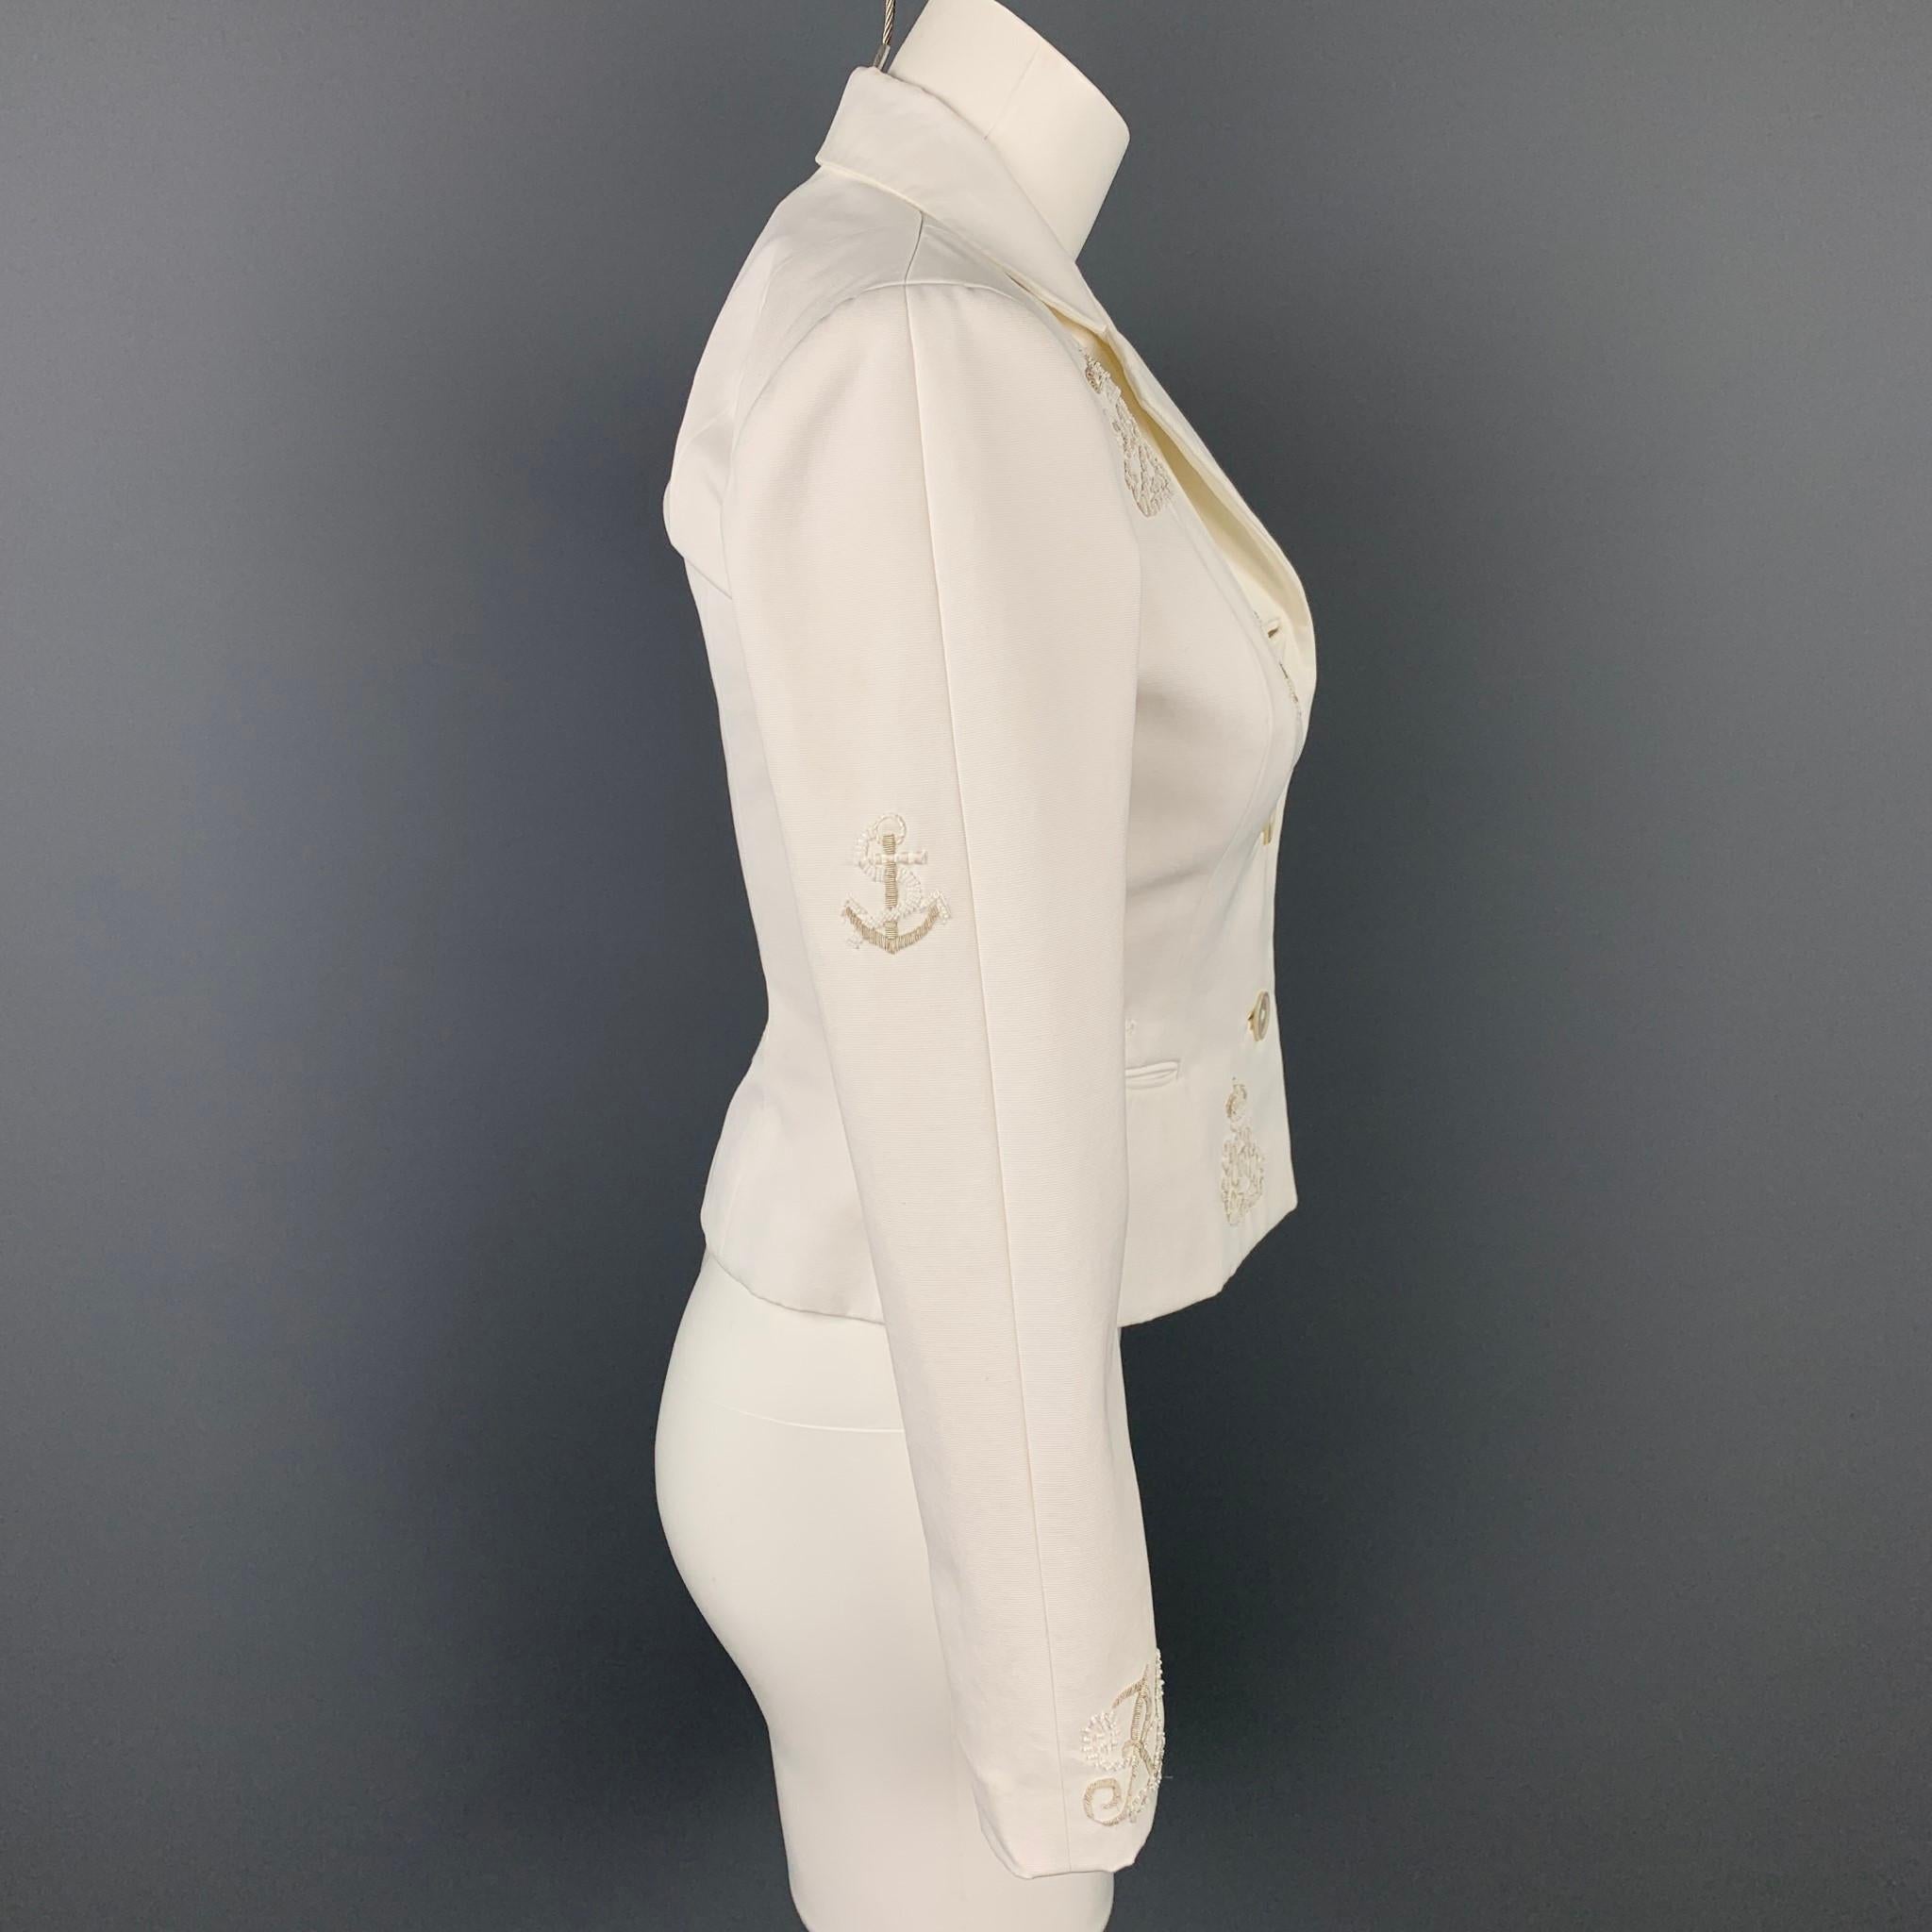 RALPH LAUREN Collection blazer comes in a white cotton with beaded designs featuring a notch lapel, slit pockets, and a buttoned closure. Made in USA.

Very Good Pre-Owned Condition.
Marked: 4

Measurements:

Shoulder: 14 in.
Bust: 32 in.
Sleeve: